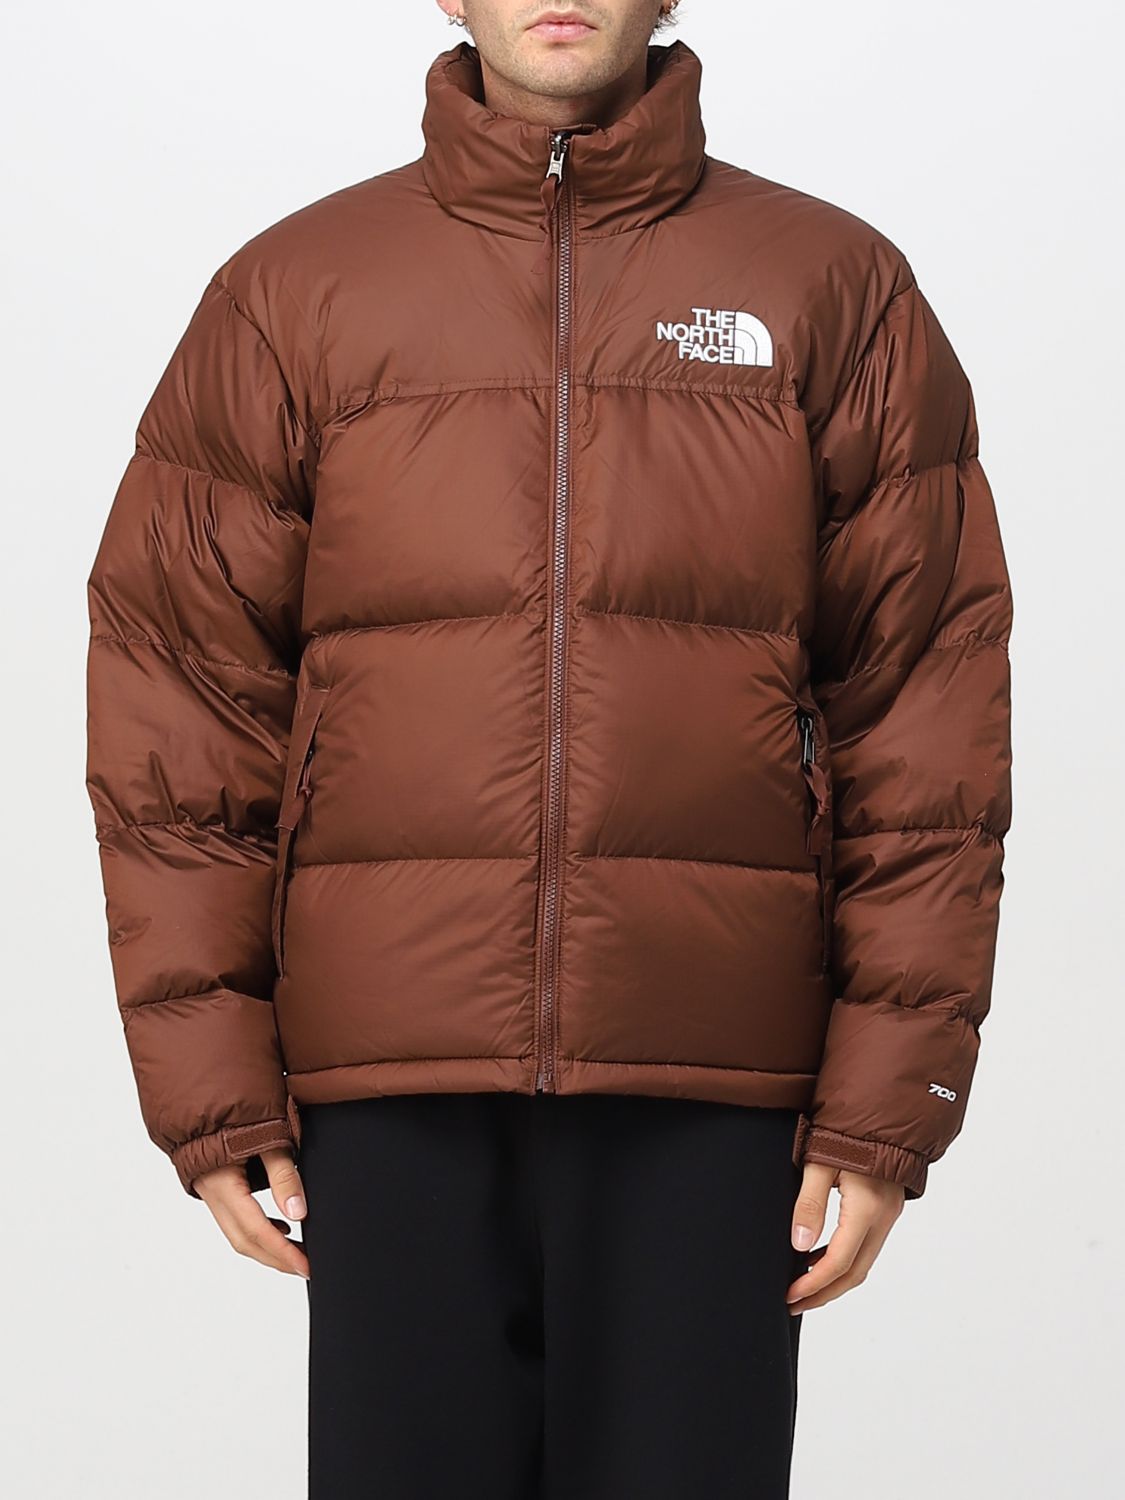 Mal funcionamiento Dictar Carne de cordero THE NORTH FACE: jacket for man - Brown | The North Face jacket NF0A3C8D  online on GIGLIO.COM